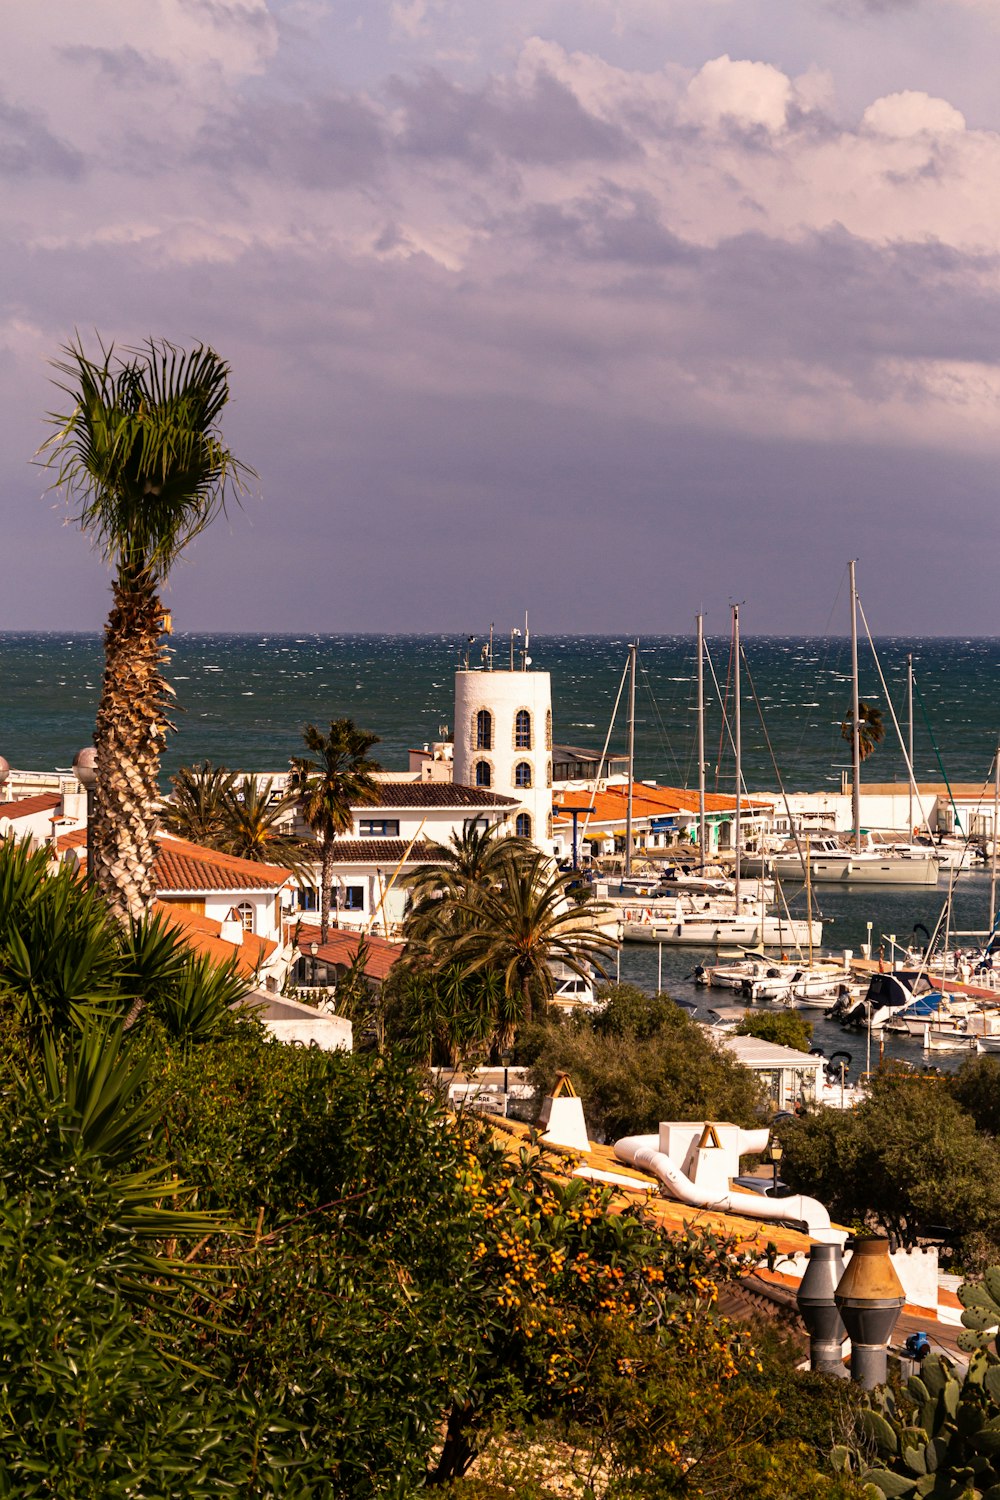 a view of a marina with boats and palm trees